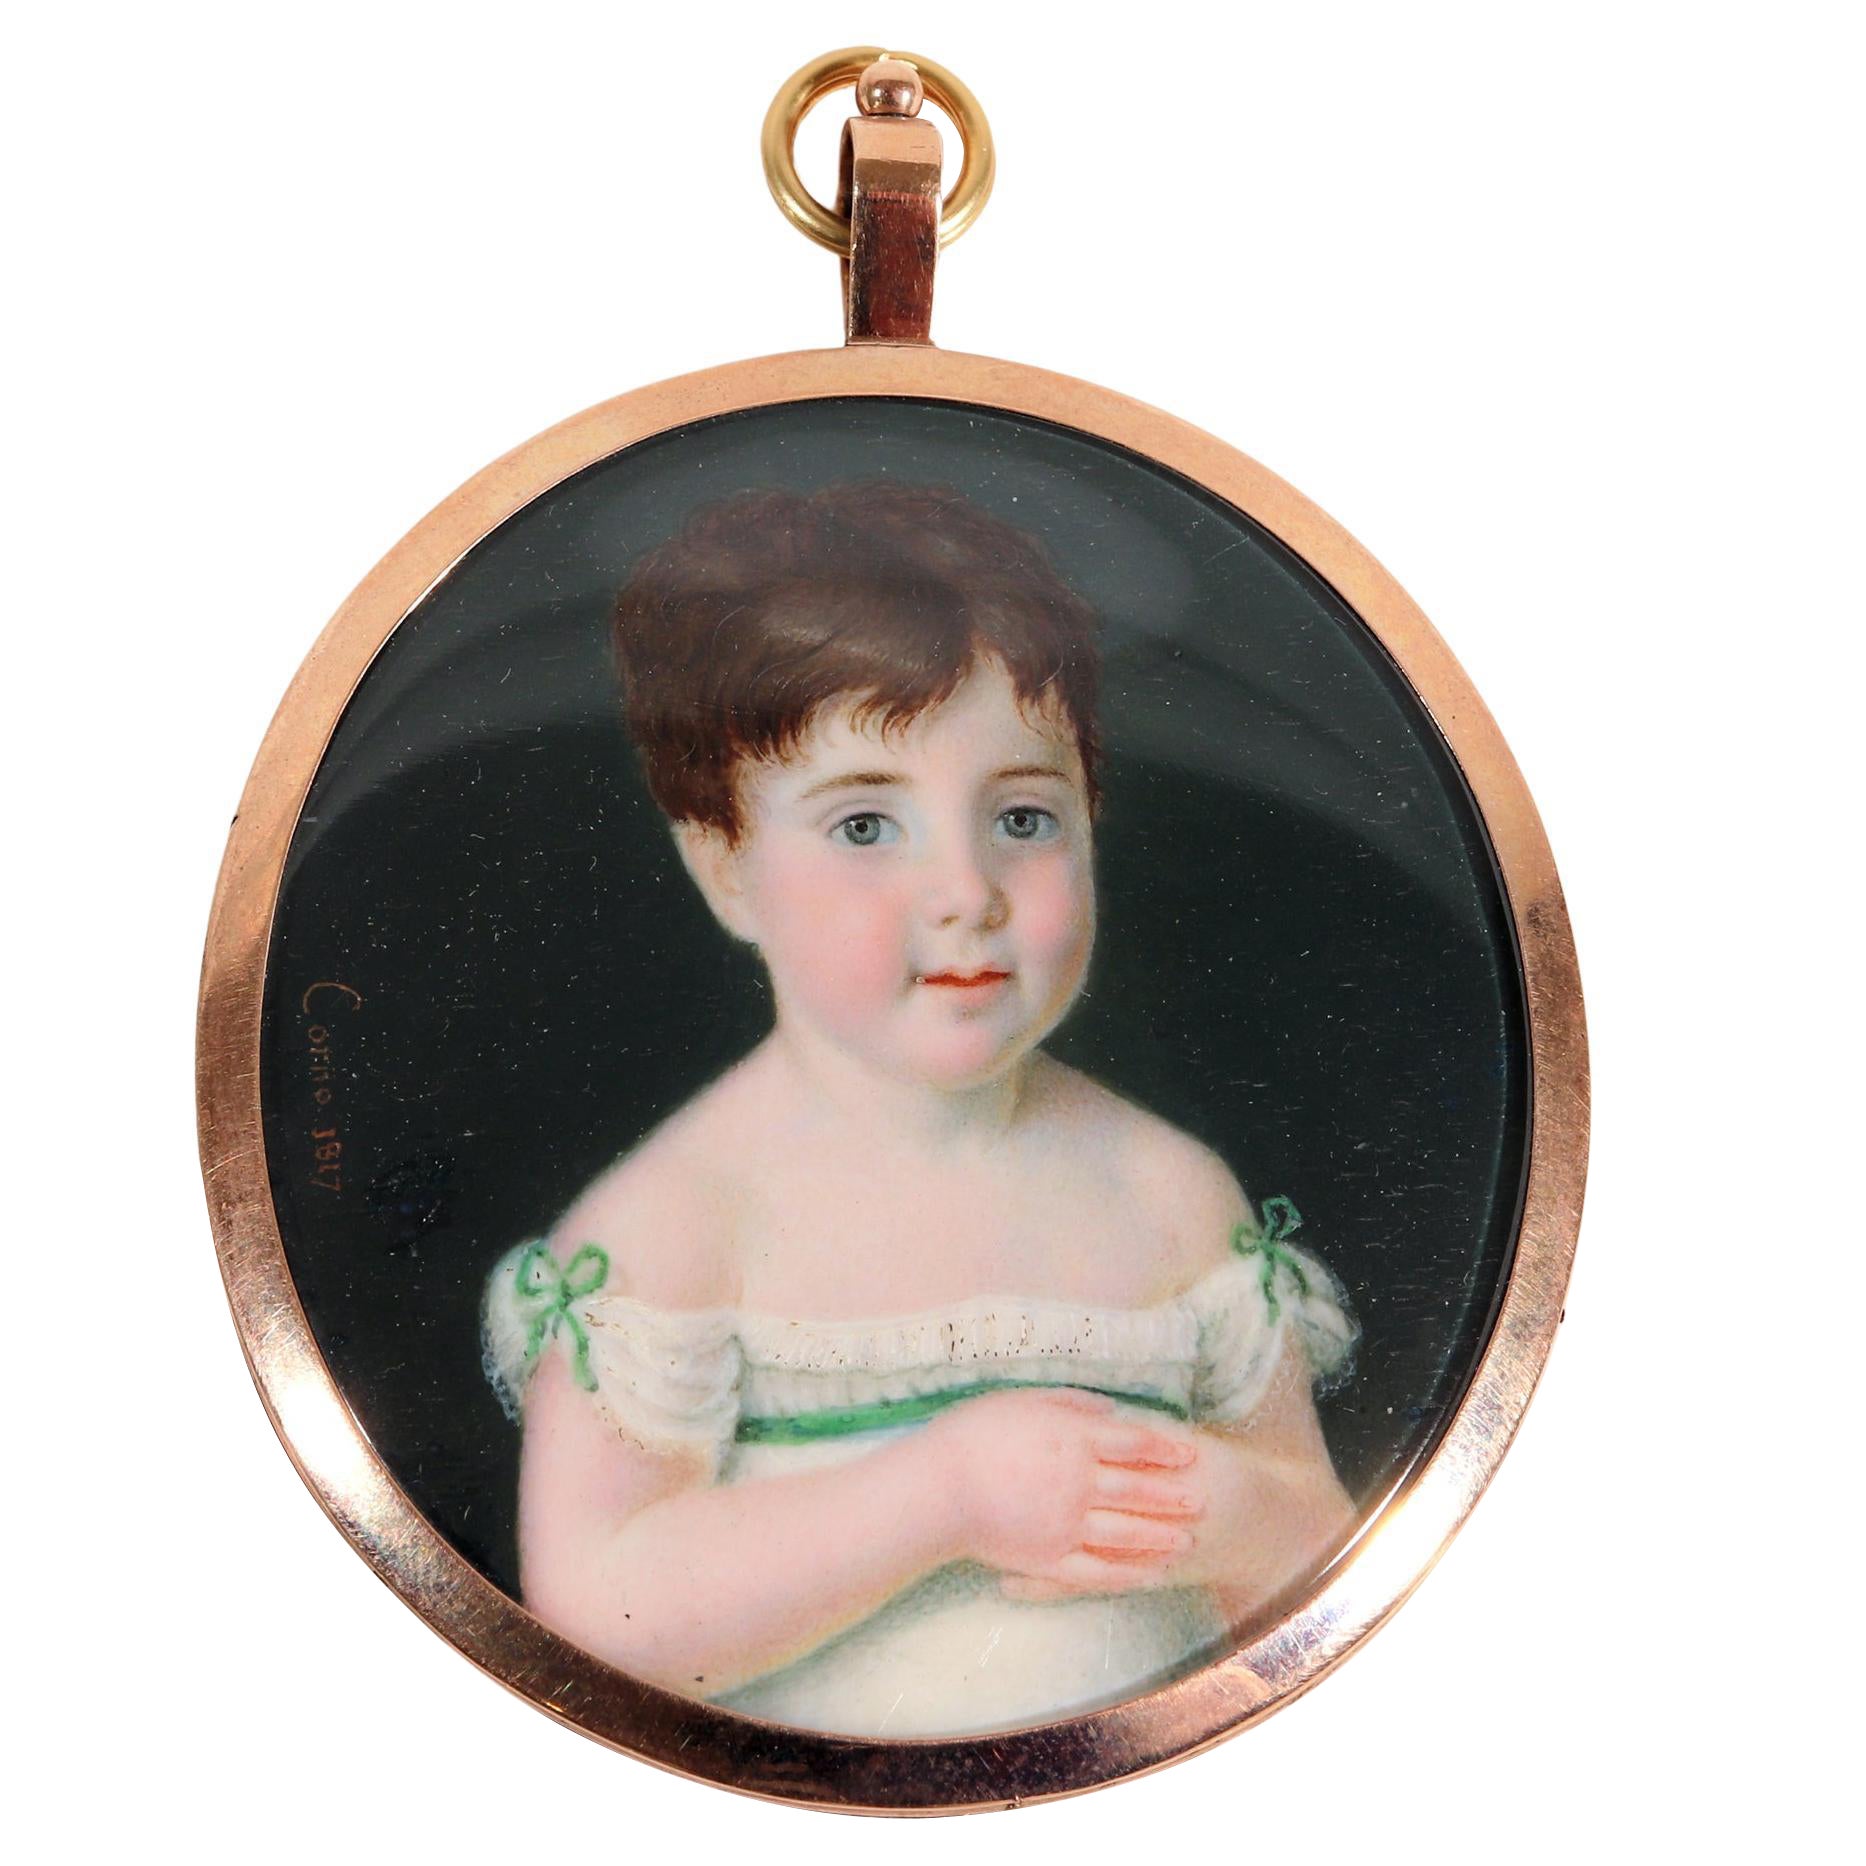 Portrait Miniature of a Young Girl, Signed Corno 1817